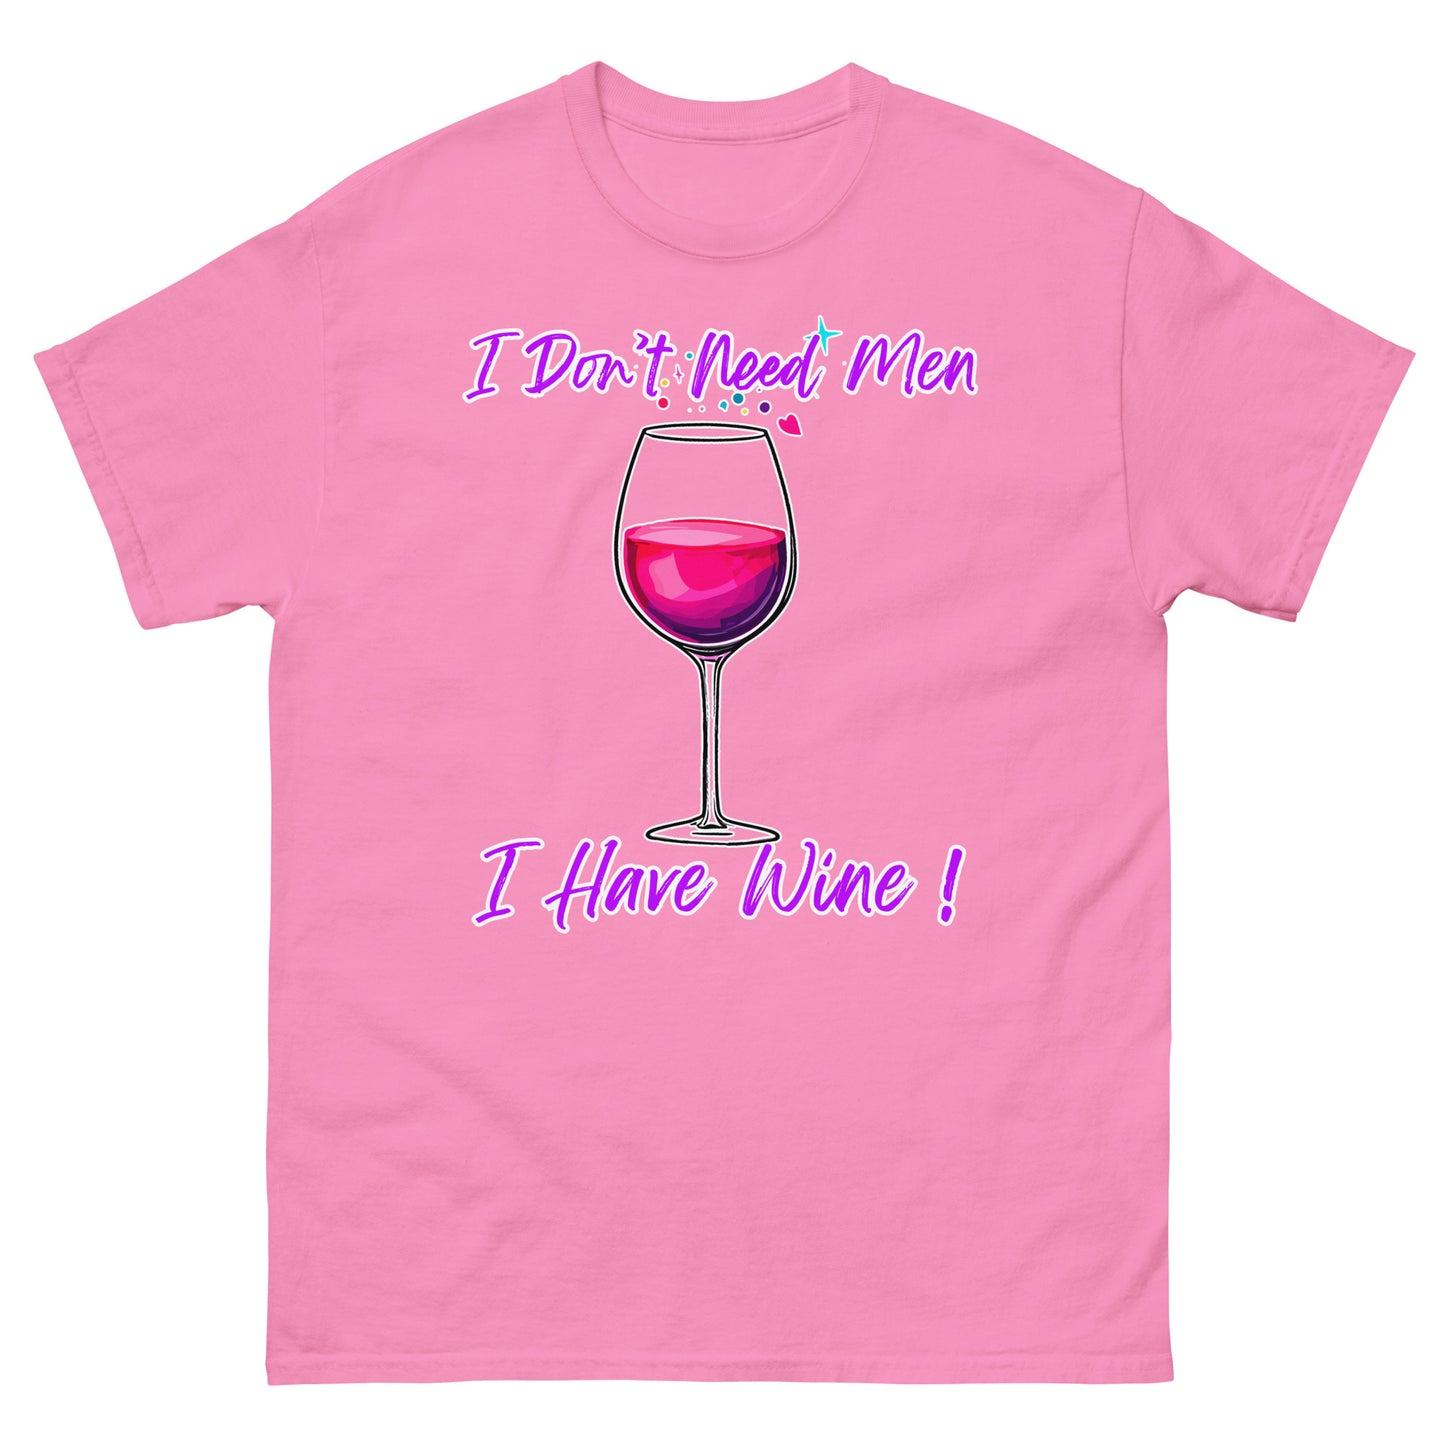 I don't need men I have wine design printed t-shirt by Whistler Shirt